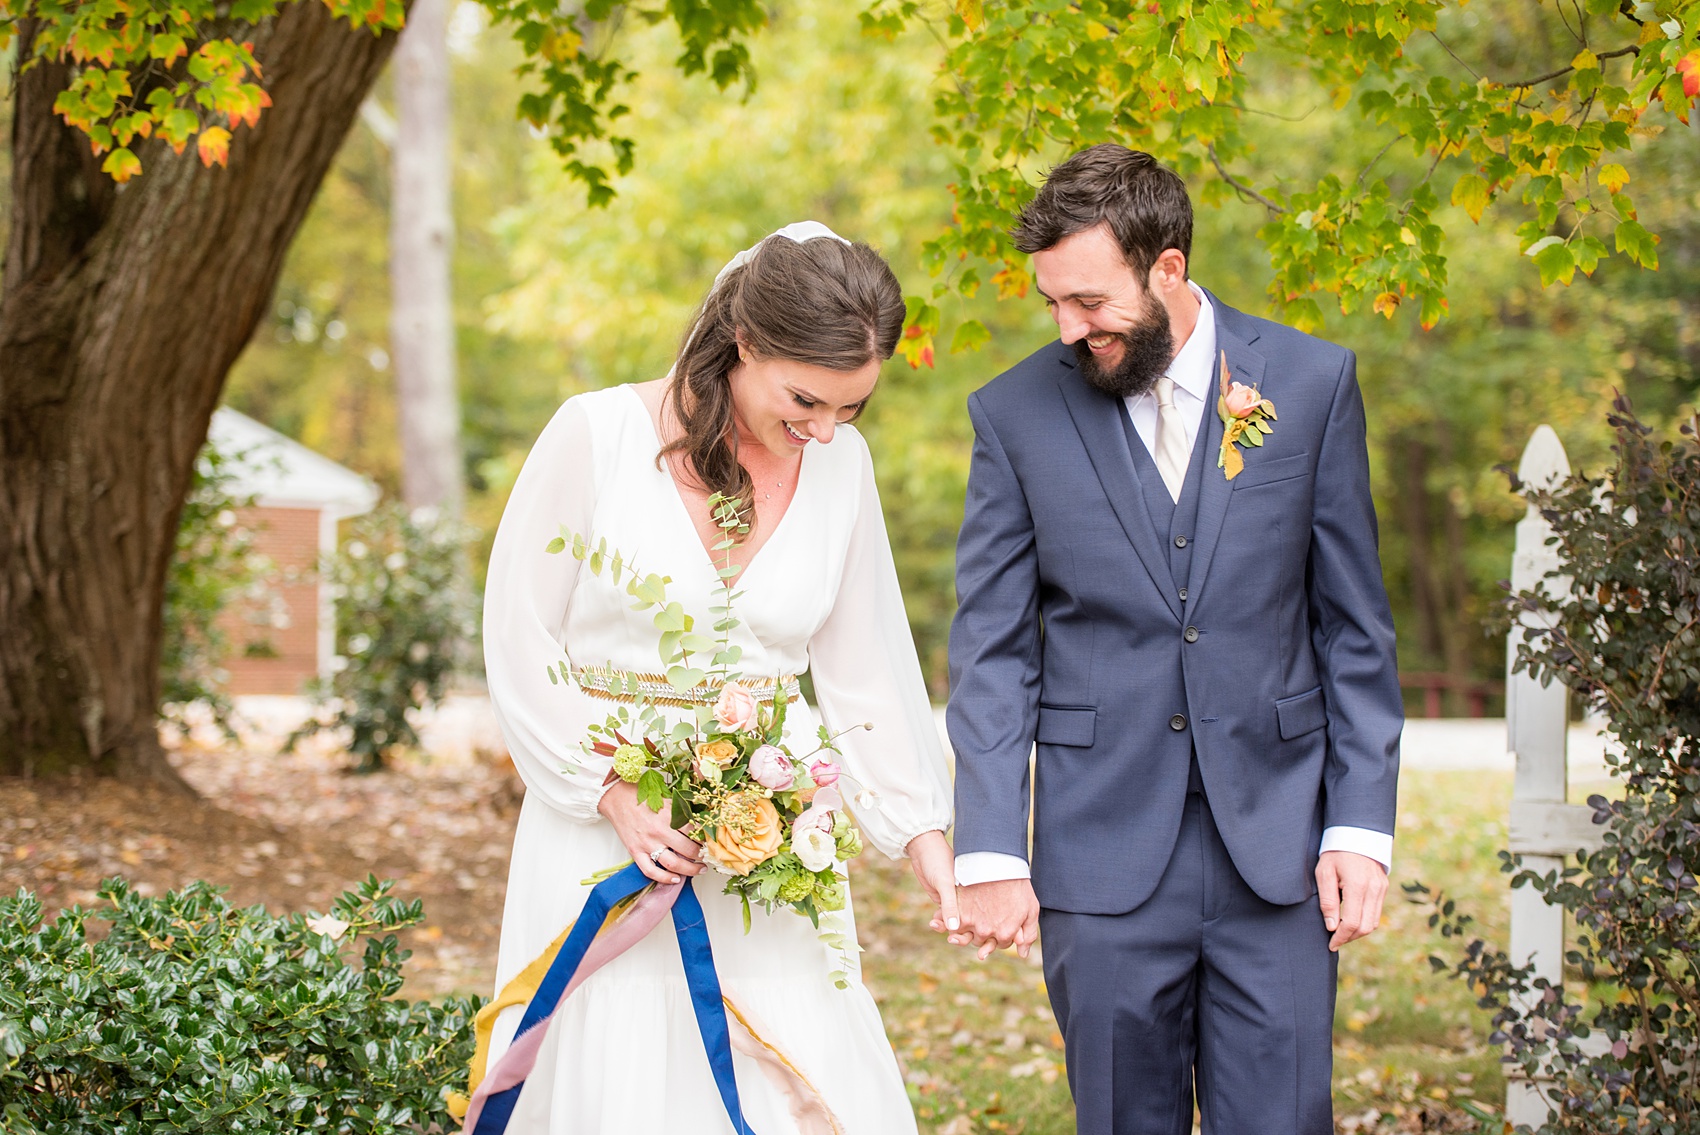 Mikkel Paige Photography photos from a wedding at Leslie-Alford Mims House in North Carolina. Picture of the Boho bride and groom in a navy suit for their fall day.